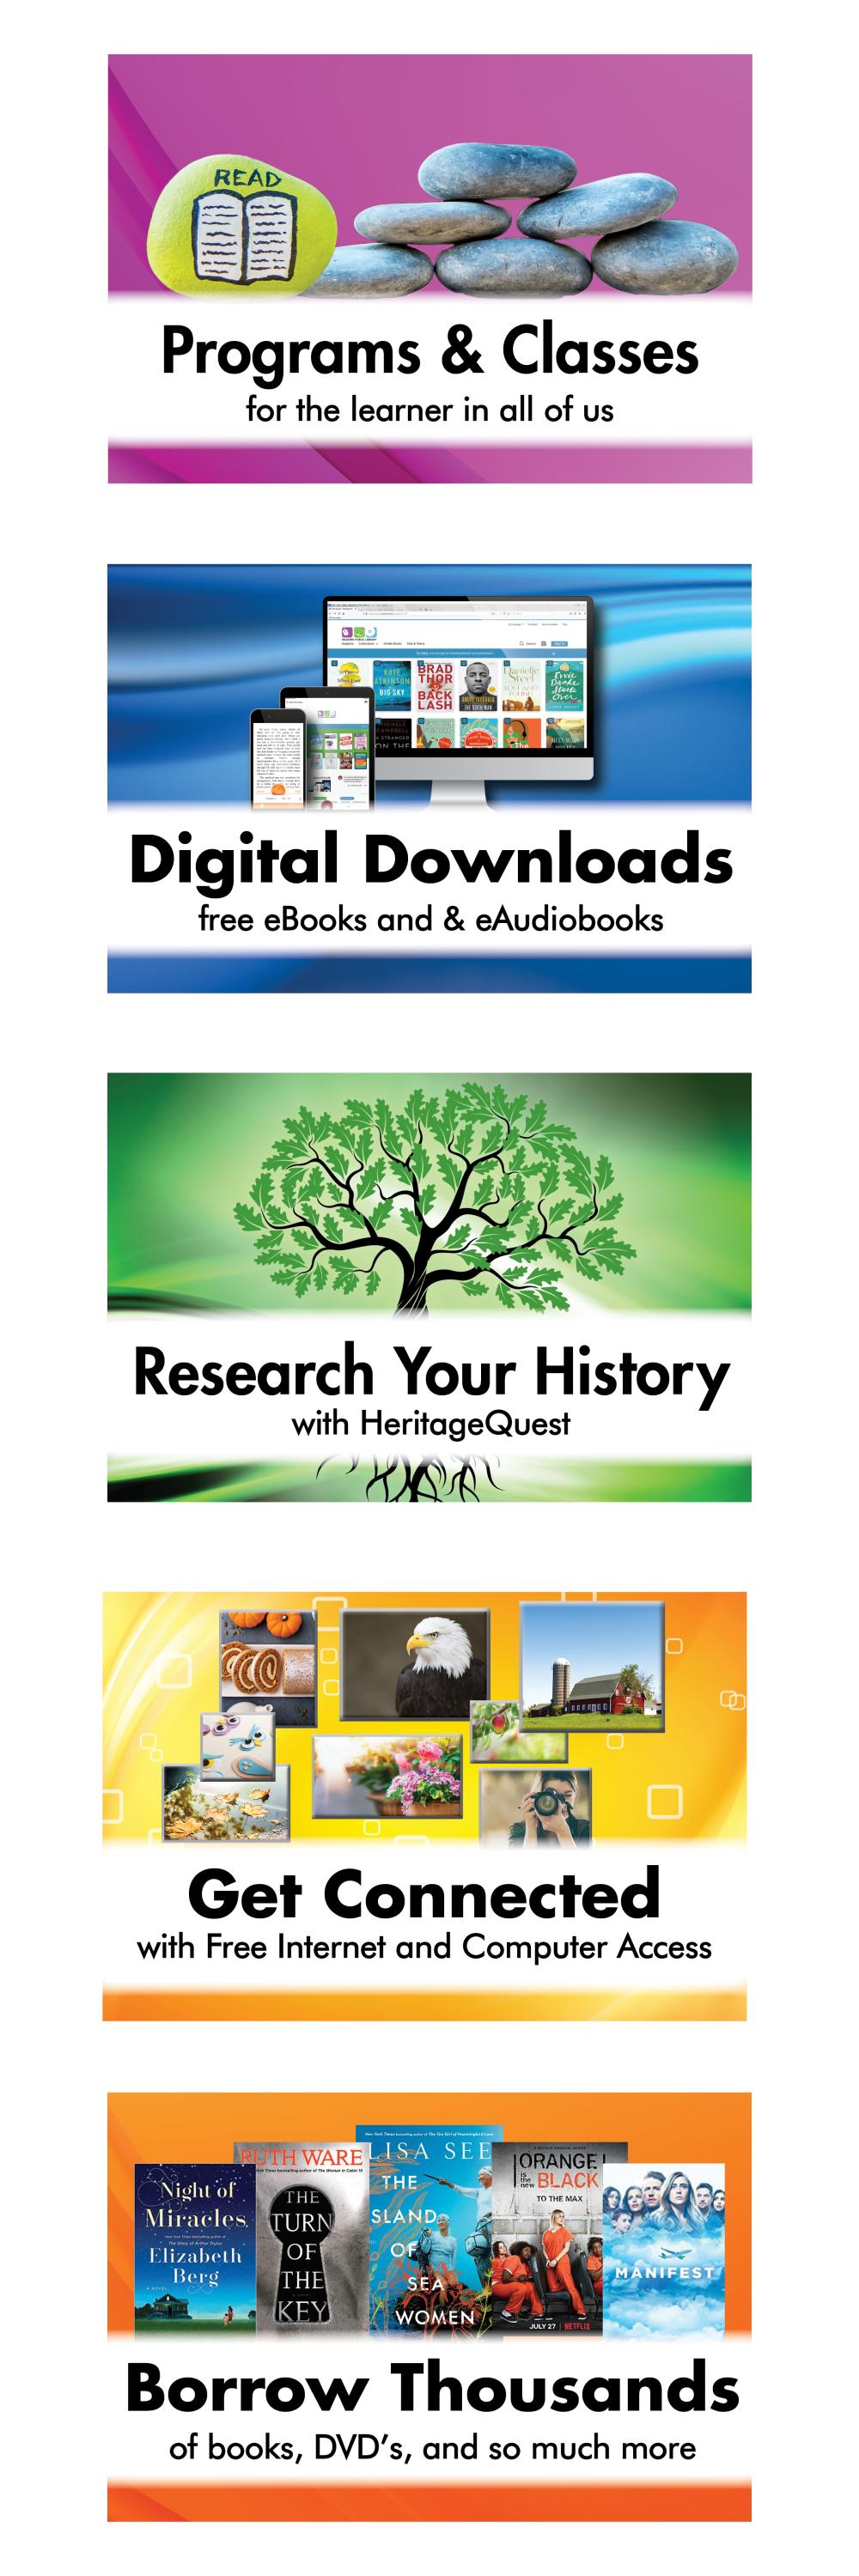 Slides of library benefits with visuals, digital books, physical books, programs, ancestry.com, internet